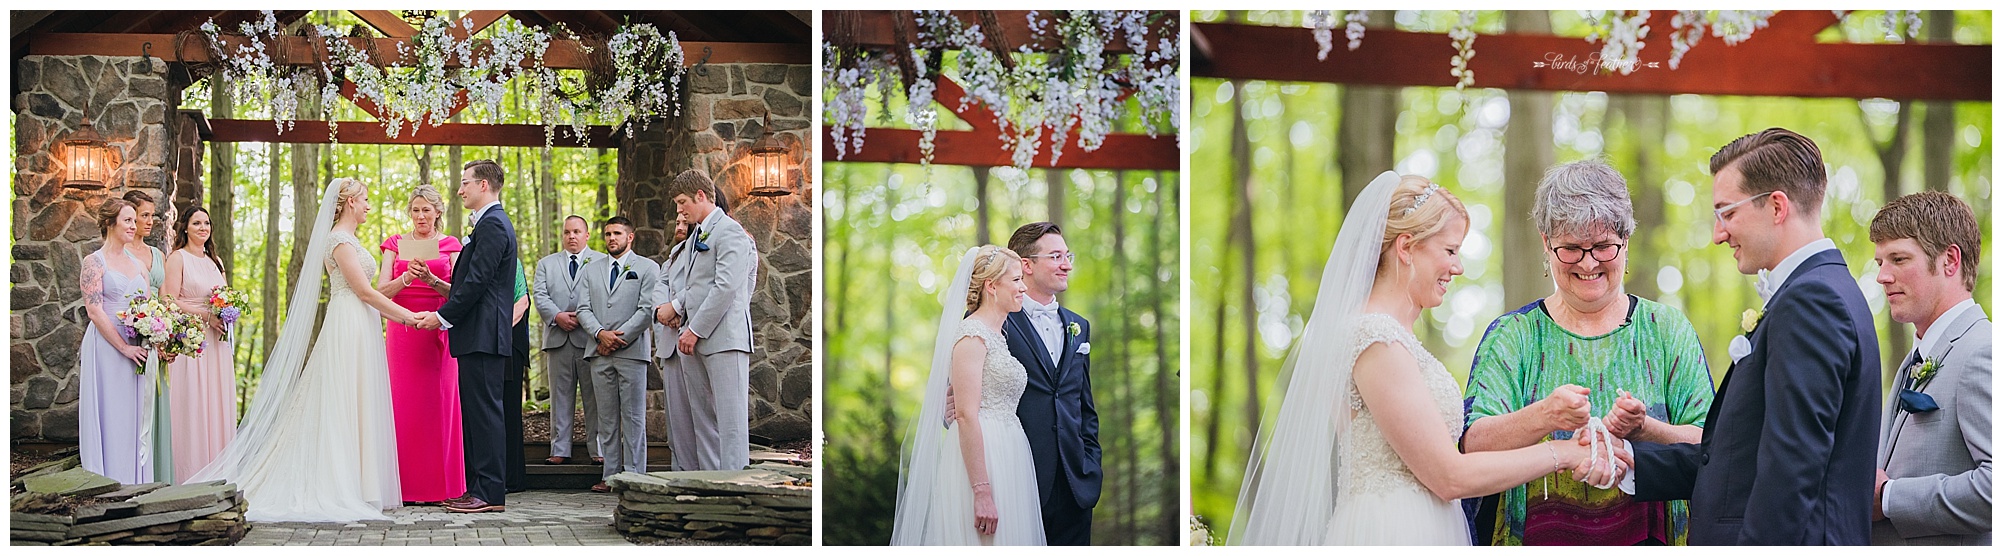 Birds of a Feather Photography, Stroudsmoor Country Inn, Stroudsburg Pa, Wedding Photography, Wedding Photographer